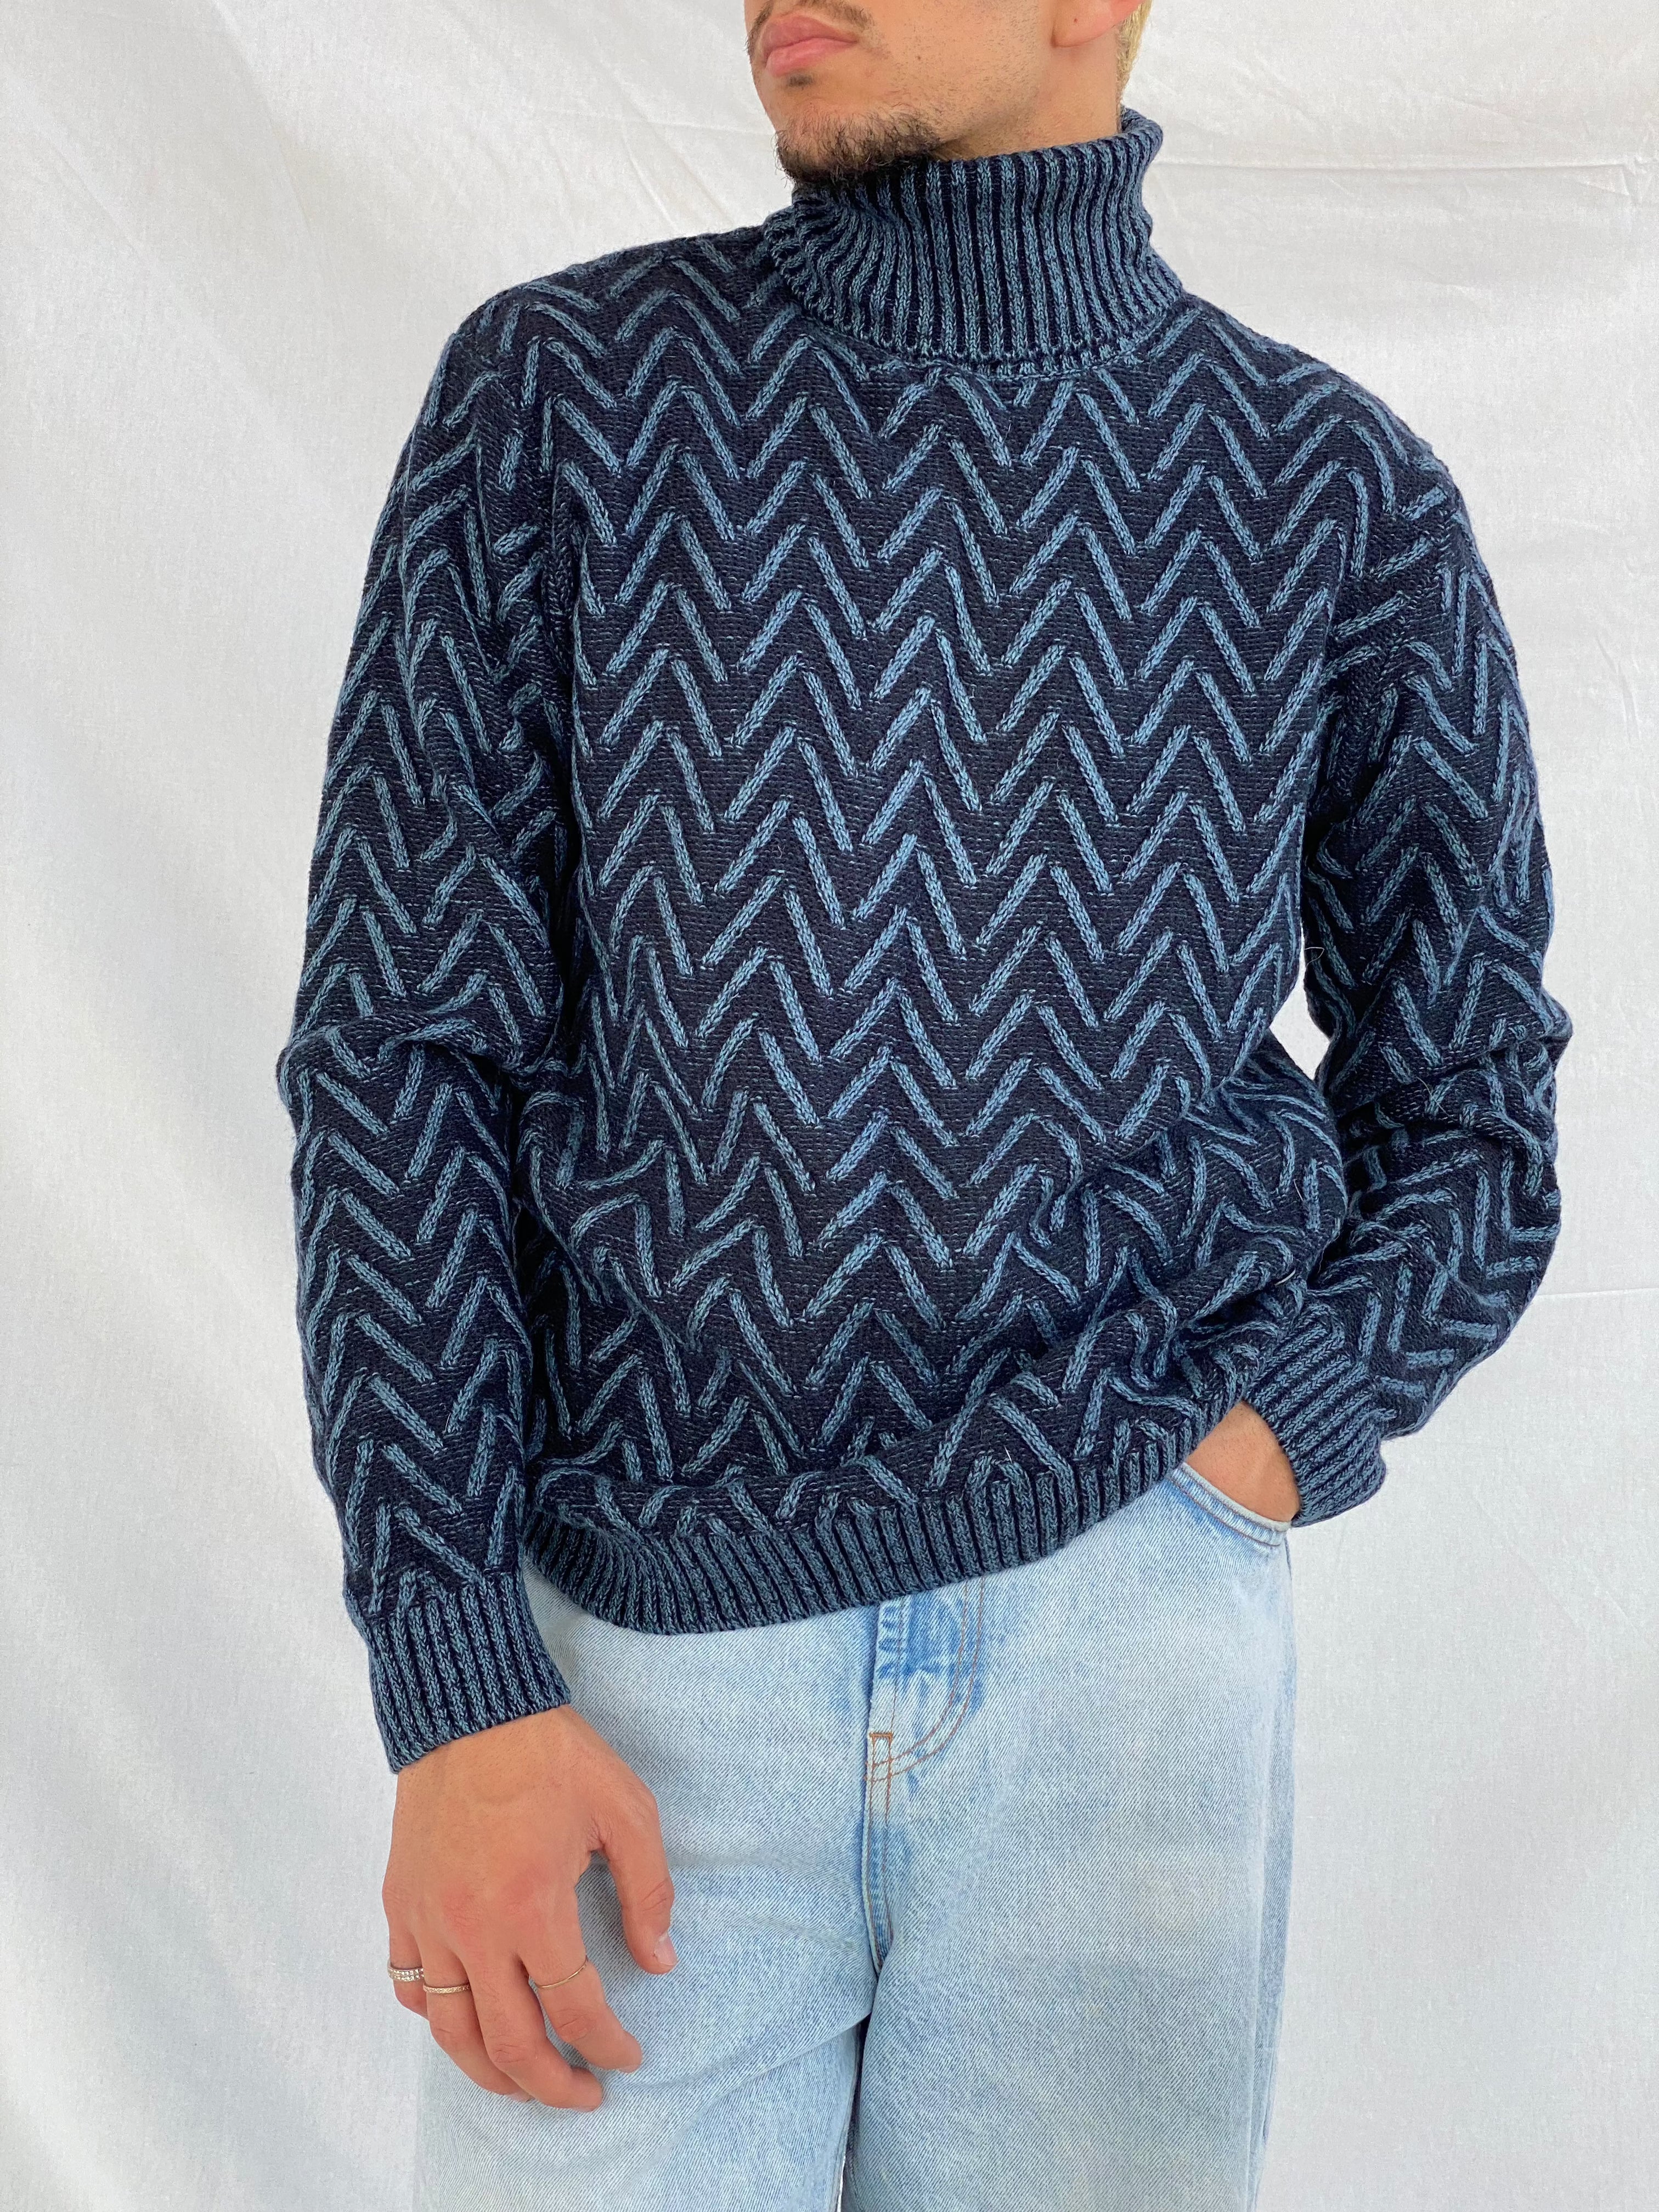 Vintage Recycled Art World Knitted Sweater - Balagan Vintage Sweater 90s, knitted, knitted sweater, men, sweater, vintage, vintage sweater, winter